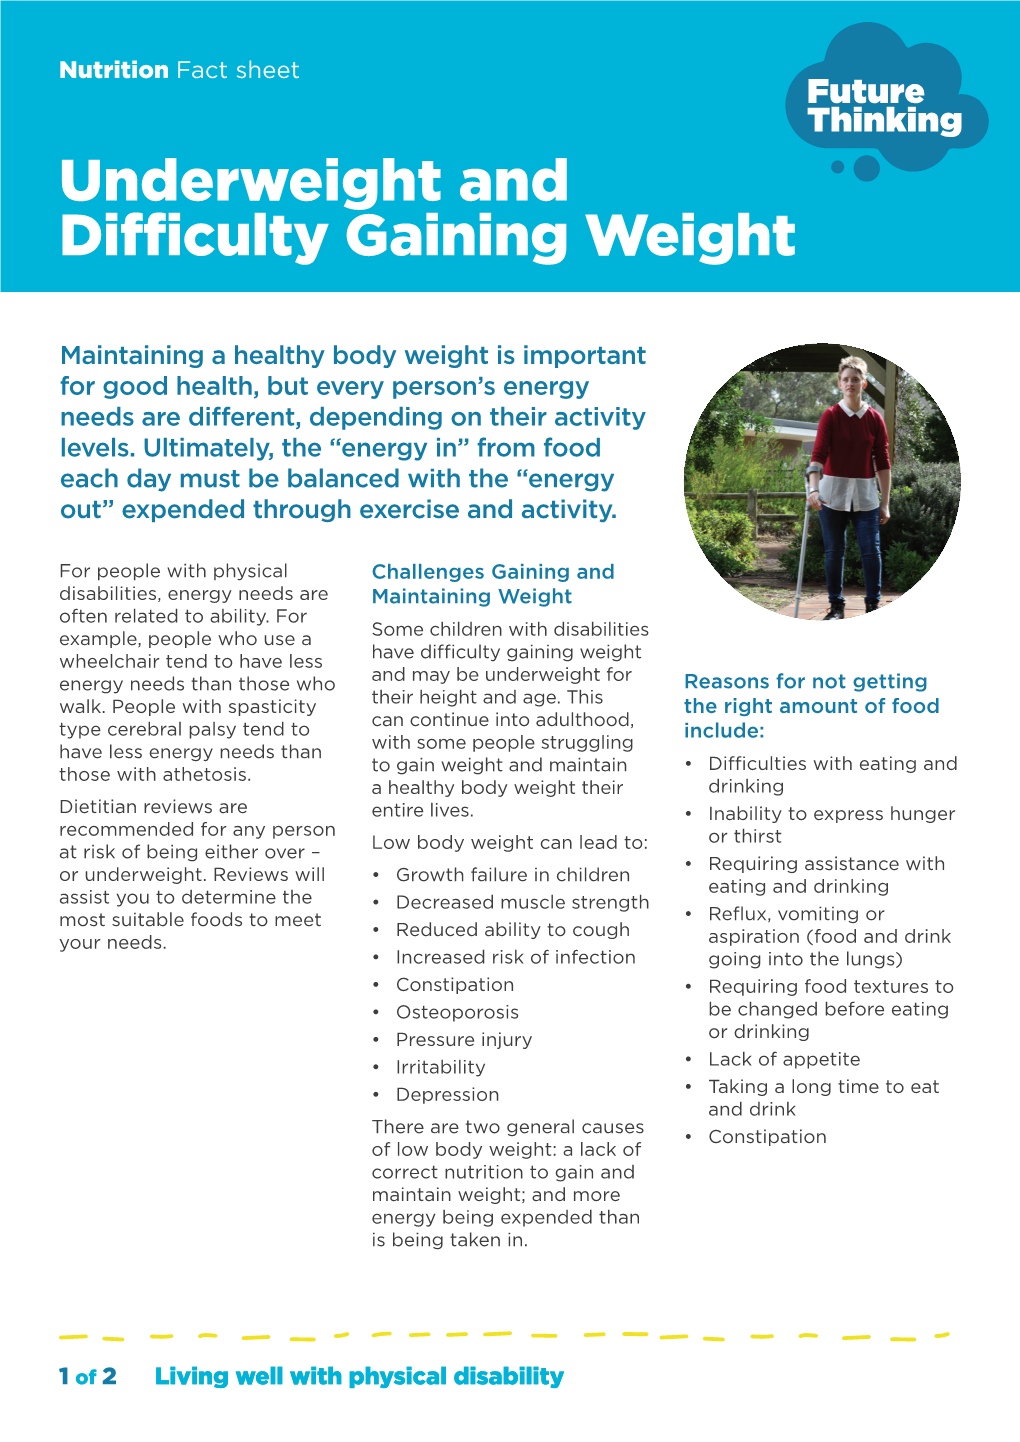 Underweight and Difficulty Gaining Weight